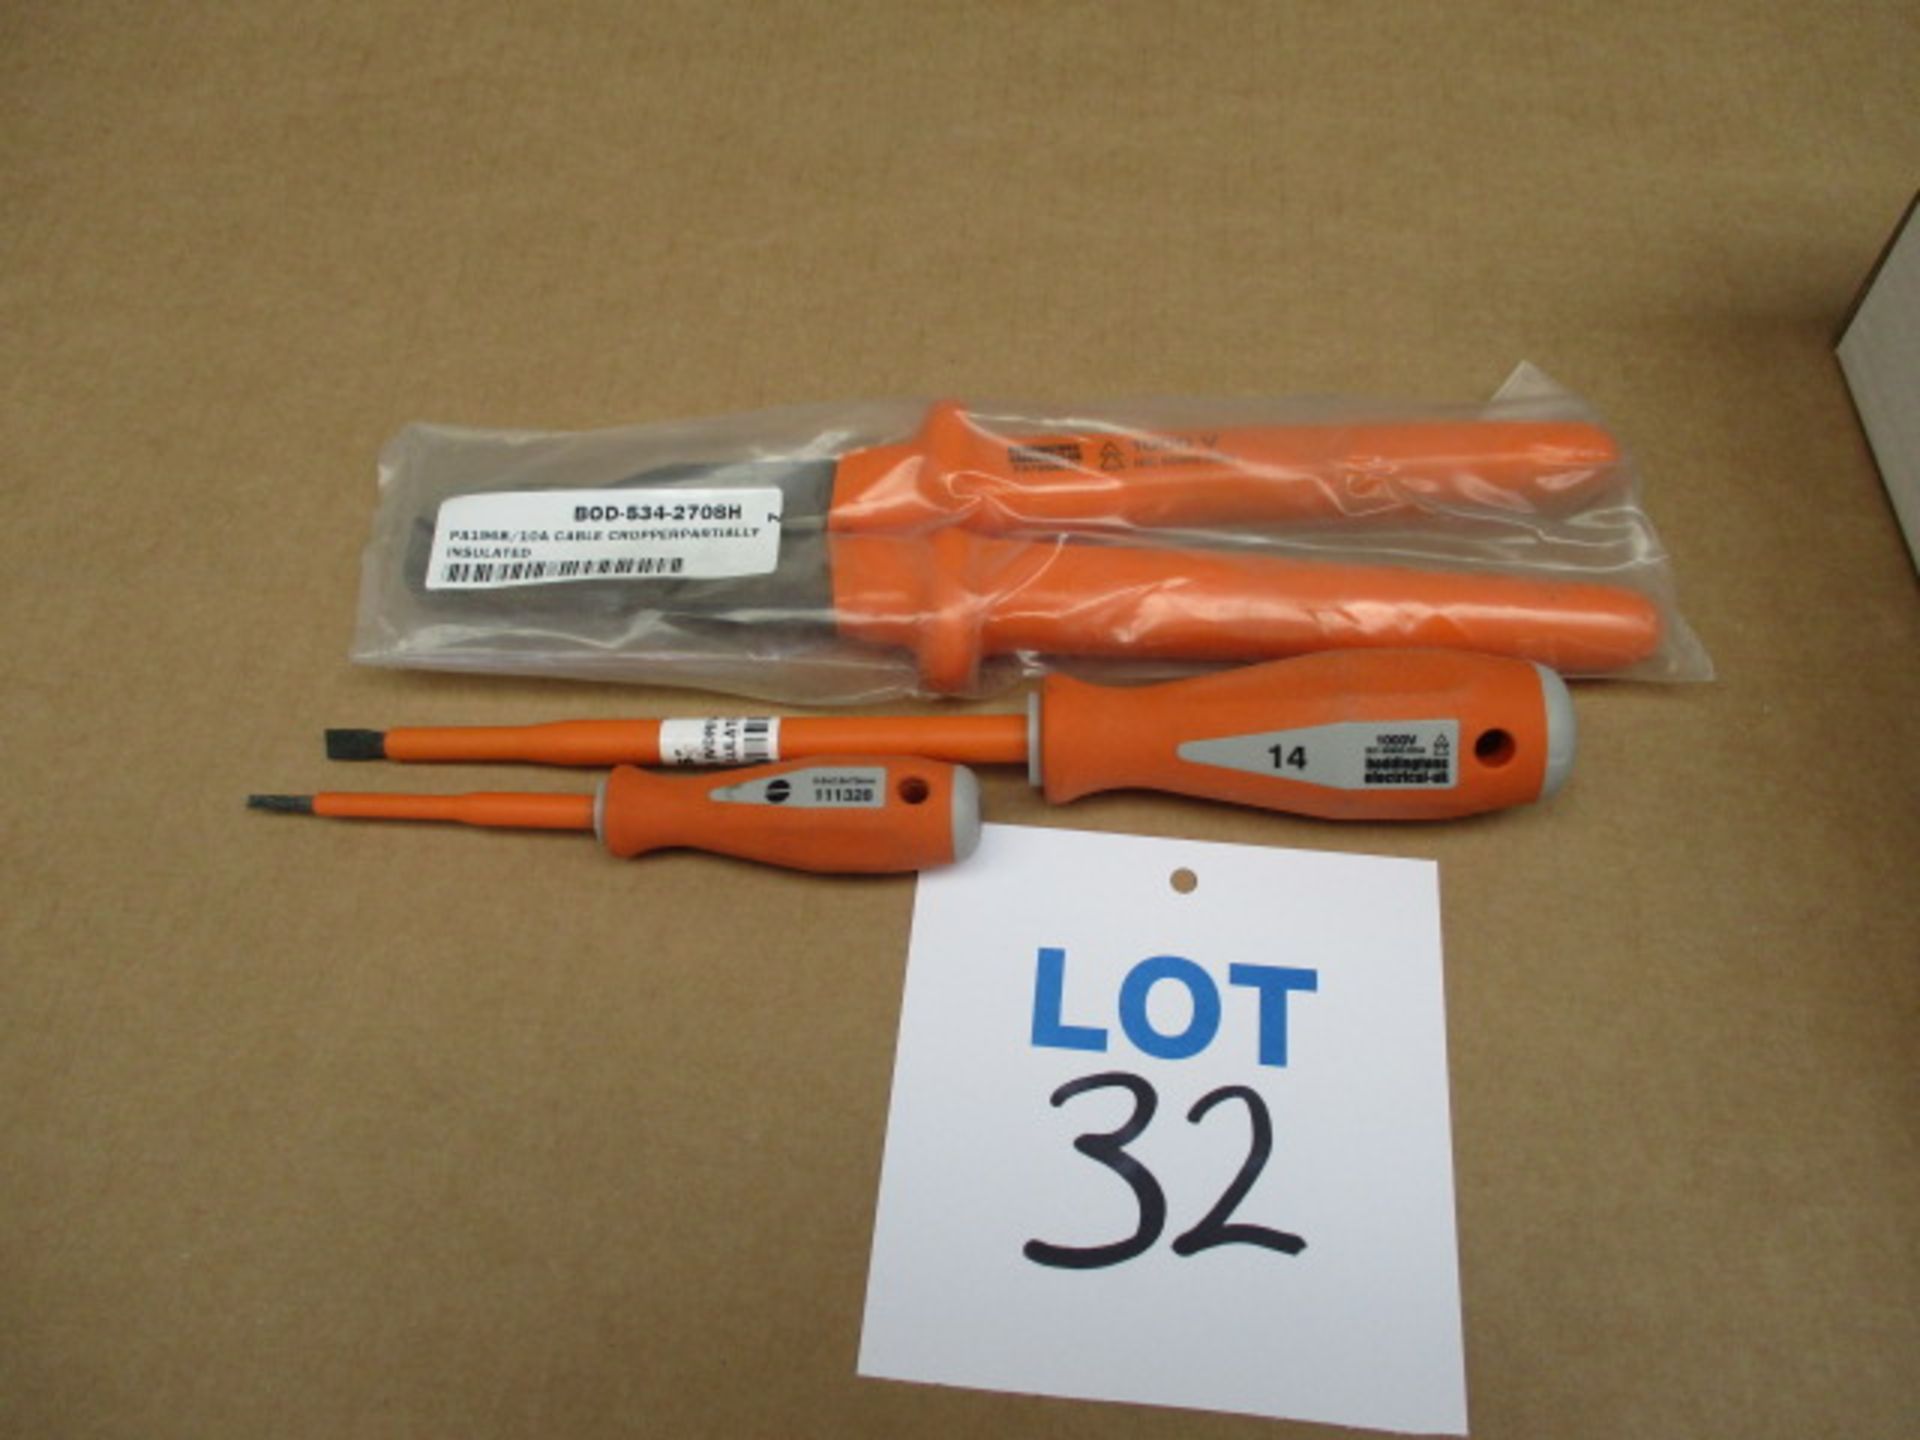 Insulated hand tools